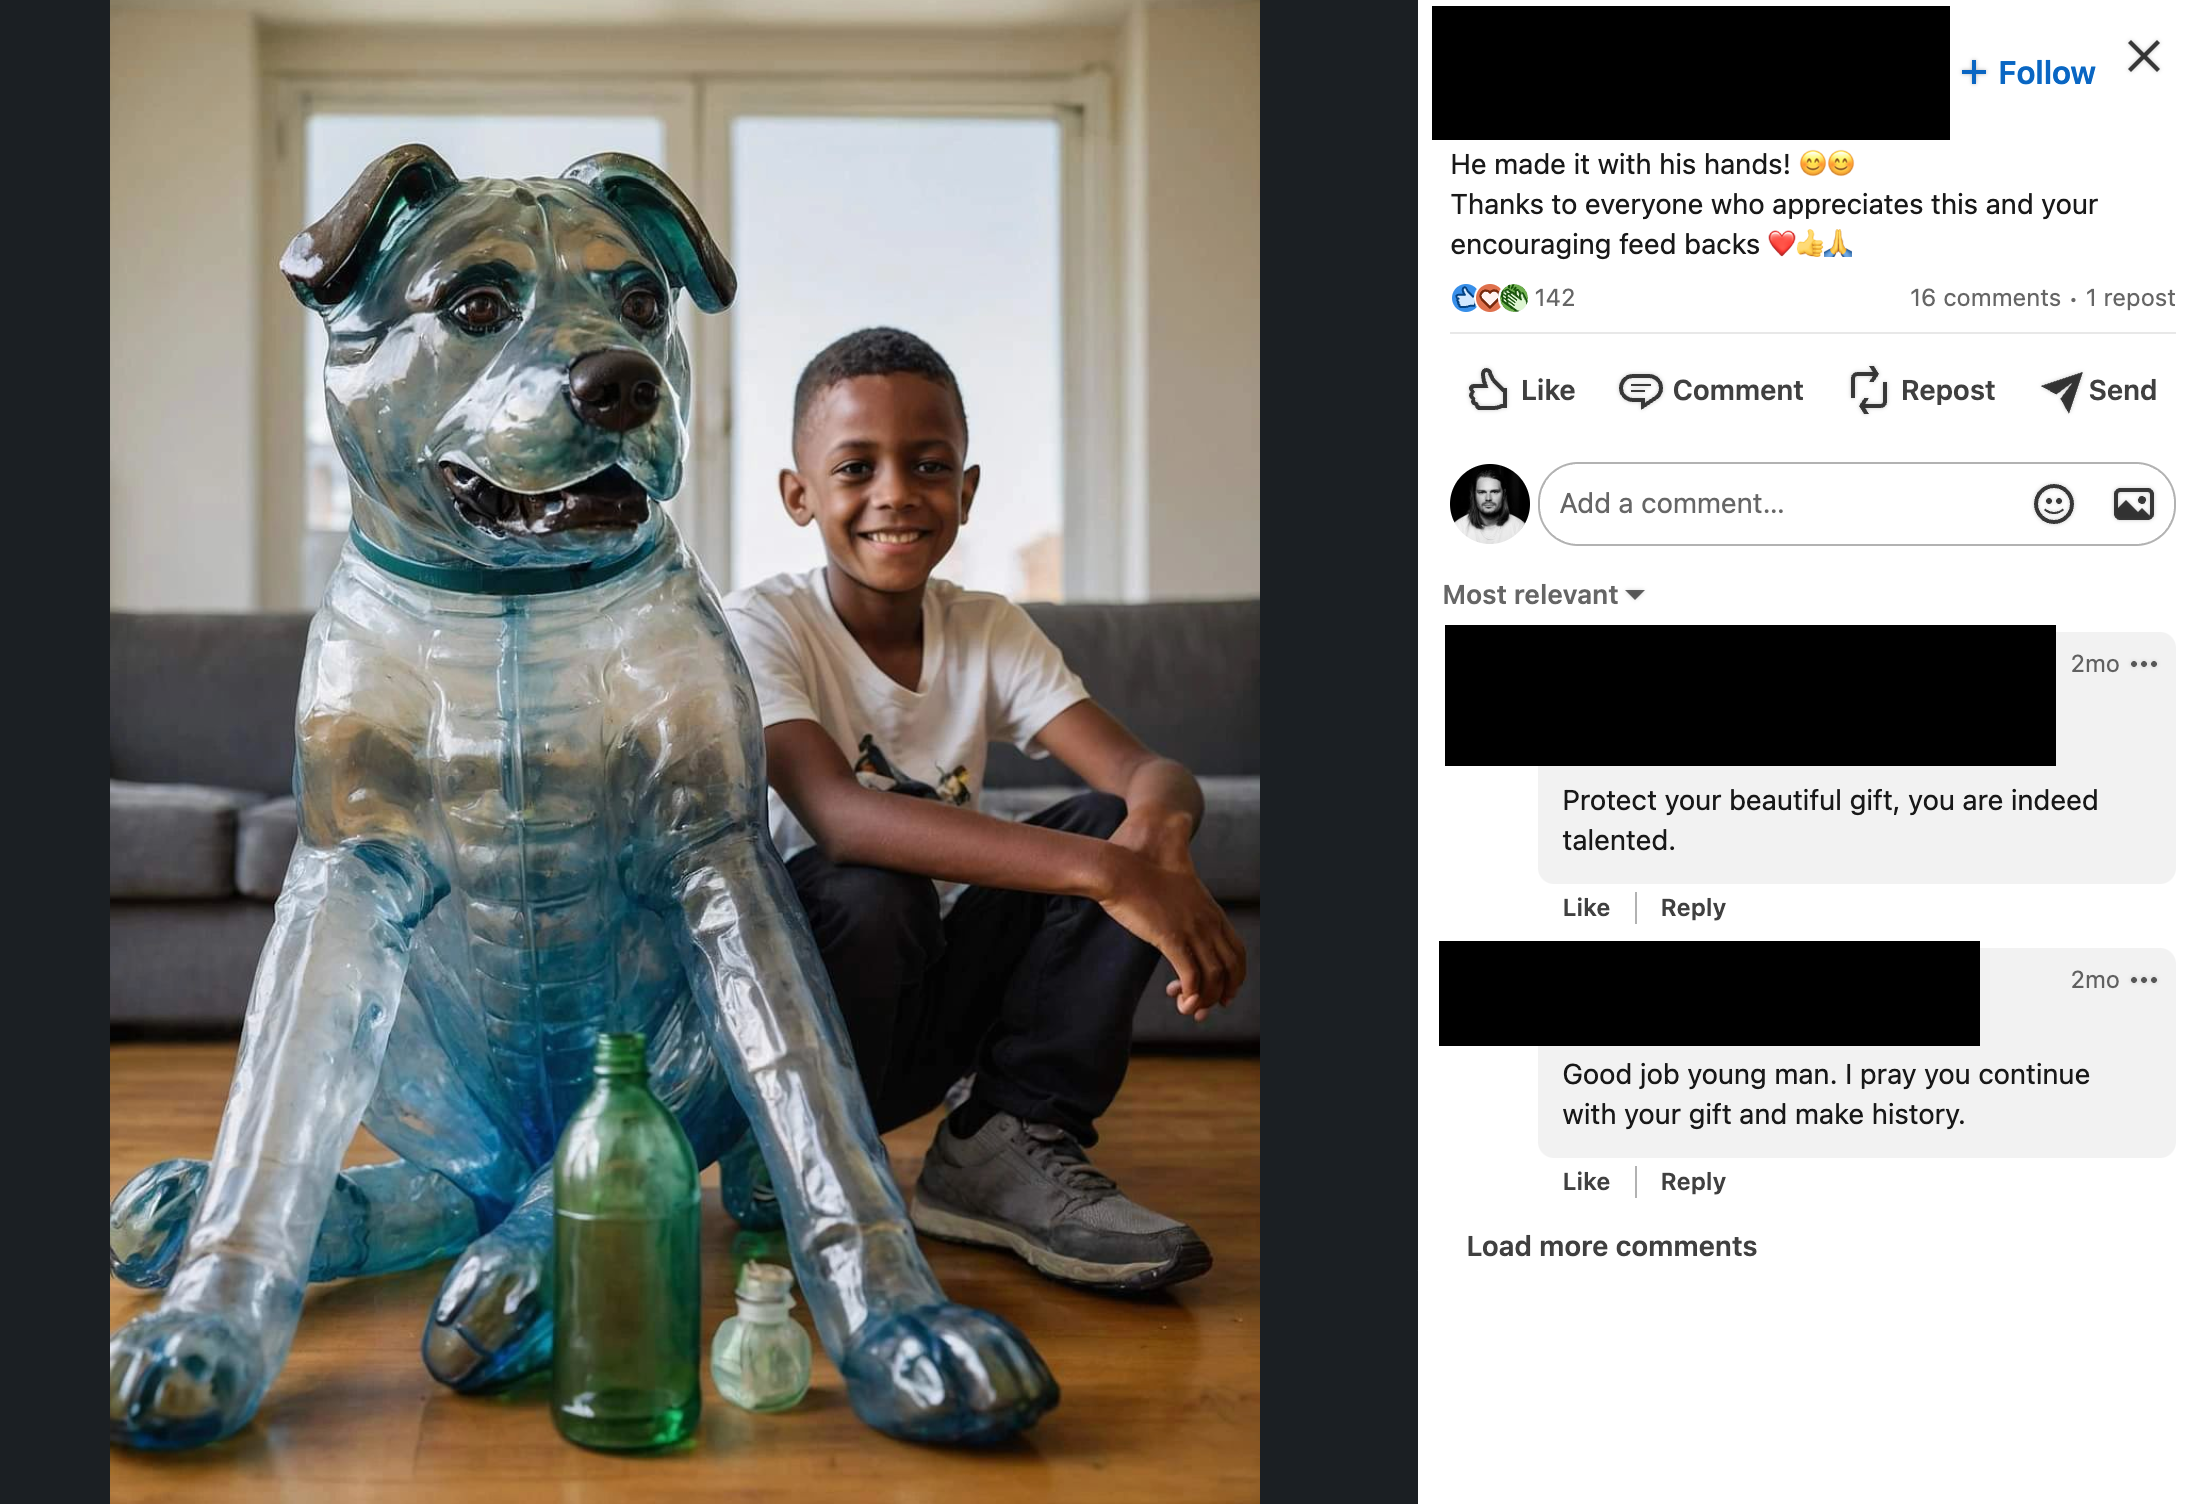 Facebook’s Bizarre AI Images Now on LinkedIn, Too